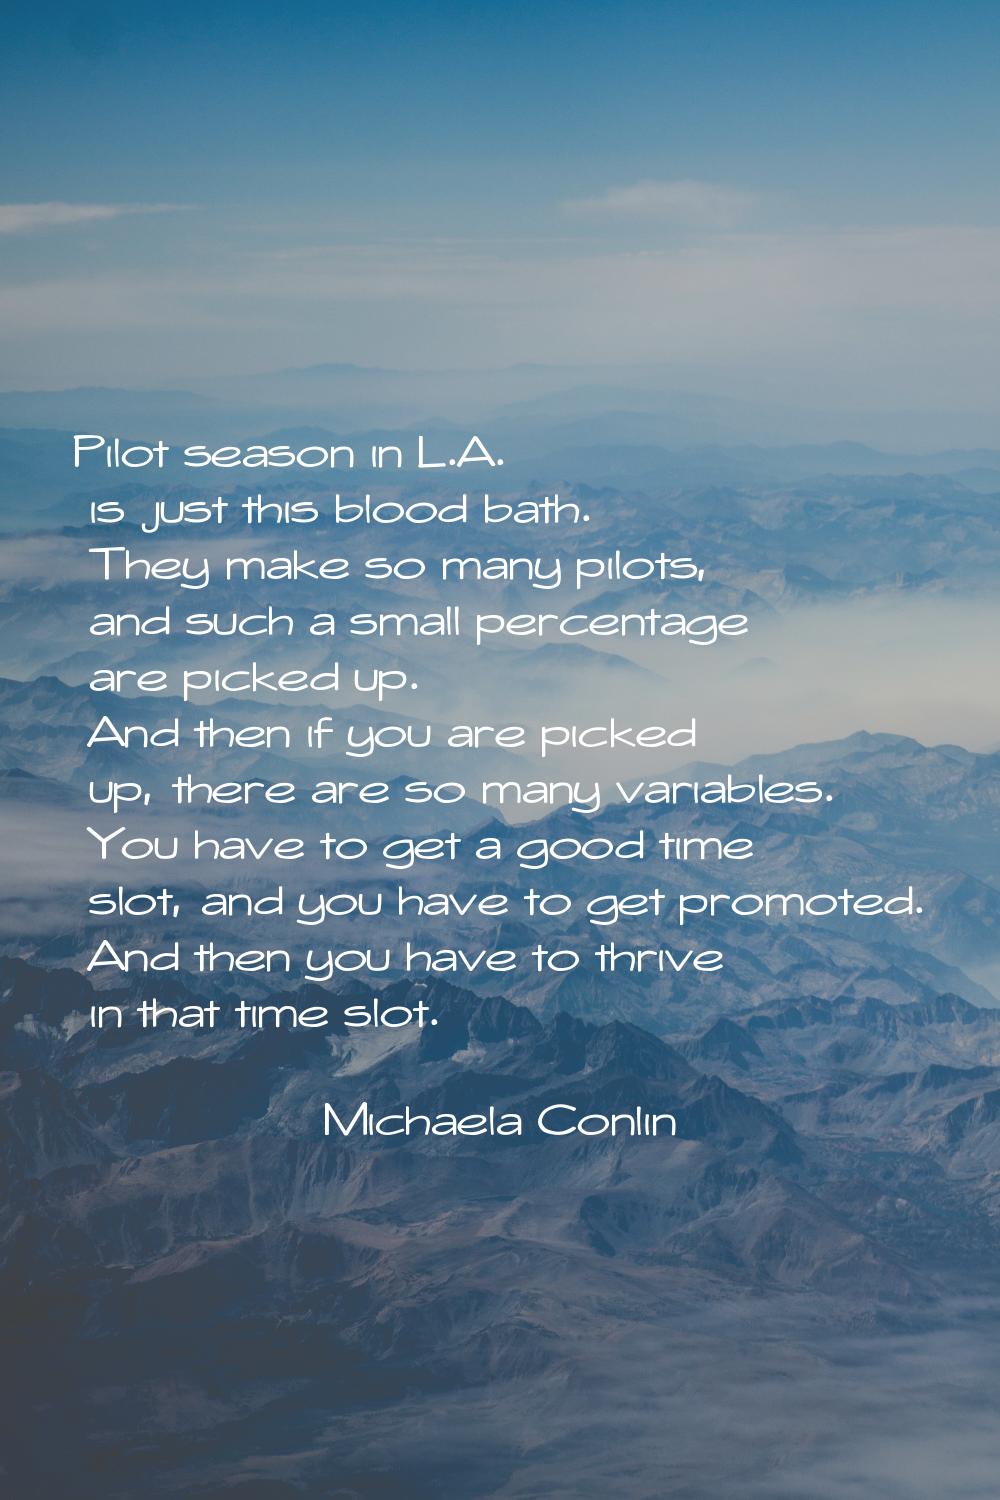 Pilot season in L.A. is just this blood bath. They make so many pilots, and such a small percentage